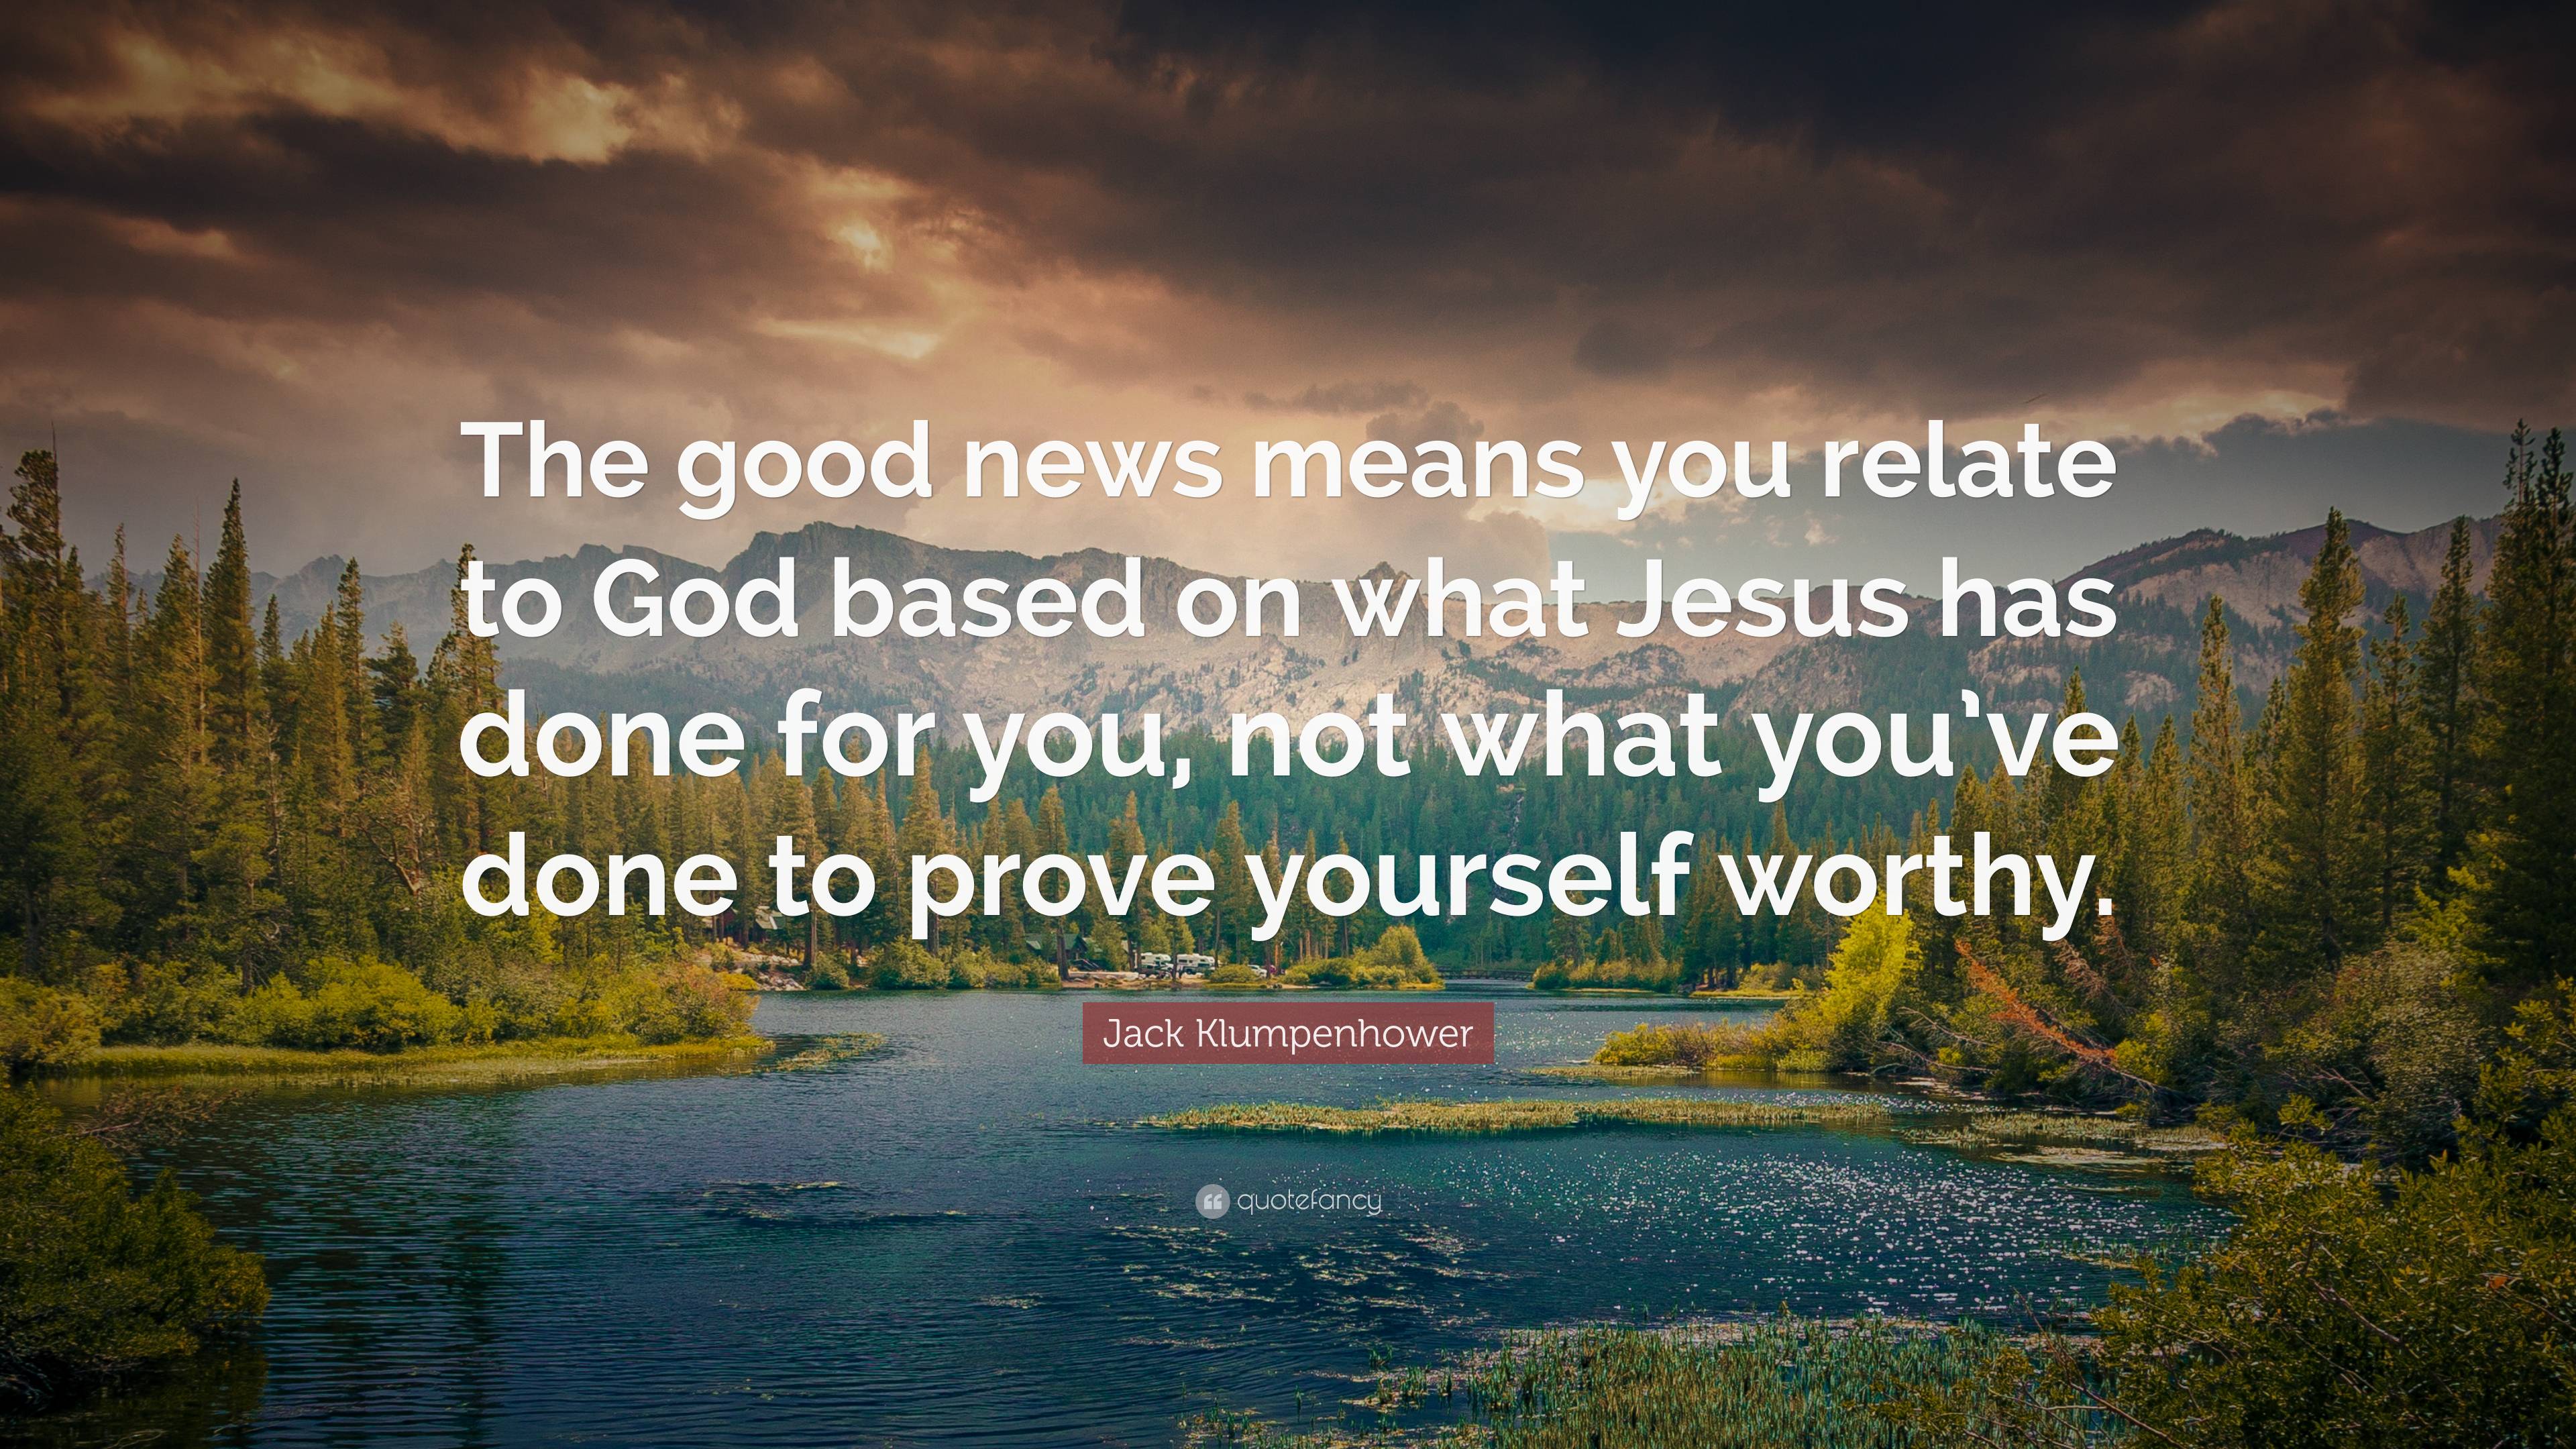 Jack Klumpenhower Quote: “The good news means you relate to God based ...